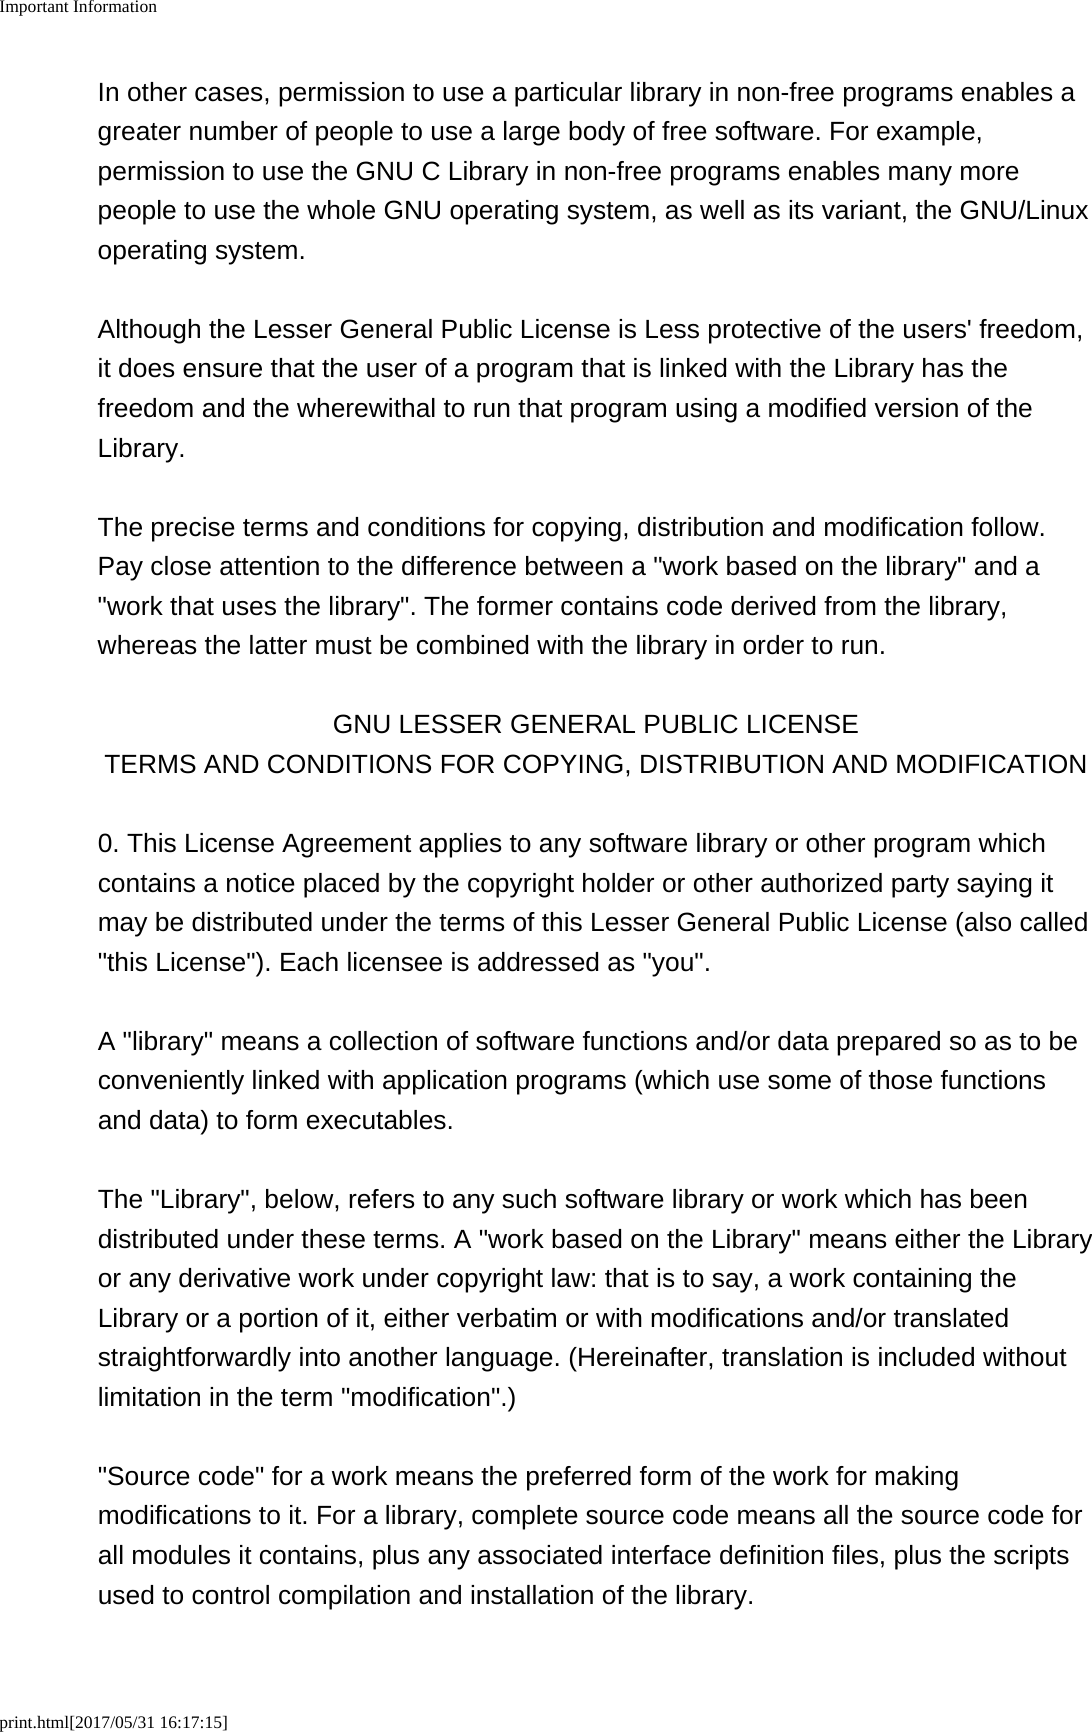 Important Informationprint.html[2017/05/31 16:17:15]In other cases, permission to use a particular library in non-free programs enables agreater number of people to use a large body of free software. For example,permission to use the GNU C Library in non-free programs enables many morepeople to use the whole GNU operating system, as well as its variant, the GNU/Linuxoperating system.Although the Lesser General Public License is Less protective of the users&apos; freedom,it does ensure that the user of a program that is linked with the Library has thefreedom and the wherewithal to run that program using a modified version of theLibrary.The precise terms and conditions for copying, distribution and modification follow.Pay close attention to the difference between a &quot;work based on the library&quot; and a&quot;work that uses the library&quot;. The former contains code derived from the library,whereas the latter must be combined with the library in order to run.GNU LESSER GENERAL PUBLIC LICENSETERMS AND CONDITIONS FOR COPYING, DISTRIBUTION AND MODIFICATION0. This License Agreement applies to any software library or other program whichcontains a notice placed by the copyright holder or other authorized party saying itmay be distributed under the terms of this Lesser General Public License (also called&quot;this License&quot;). Each licensee is addressed as &quot;you&quot;.A &quot;library&quot; means a collection of software functions and/or data prepared so as to beconveniently linked with application programs (which use some of those functionsand data) to form executables.The &quot;Library&quot;, below, refers to any such software library or work which has beendistributed under these terms. A &quot;work based on the Library&quot; means either the Libraryor any derivative work under copyright law: that is to say, a work containing theLibrary or a portion of it, either verbatim or with modifications and/or translatedstraightforwardly into another language. (Hereinafter, translation is included withoutlimitation in the term &quot;modification&quot;.)&quot;Source code&quot; for a work means the preferred form of the work for makingmodifications to it. For a library, complete source code means all the source code forall modules it contains, plus any associated interface definition files, plus the scriptsused to control compilation and installation of the library.